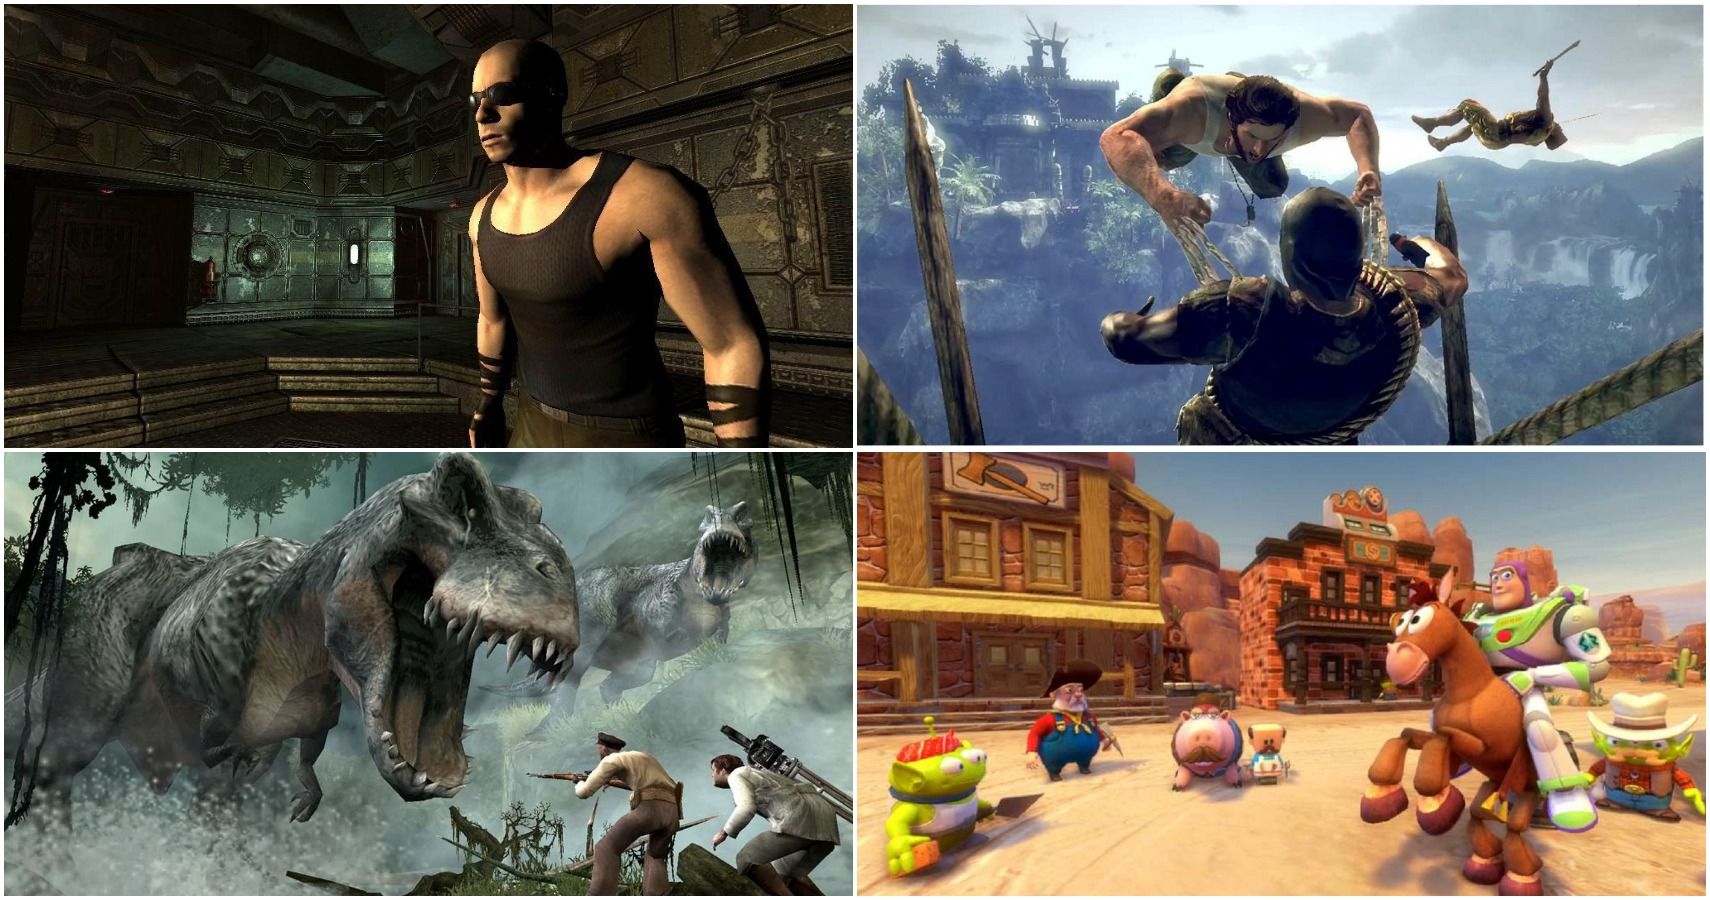 8 More Video Games Better Than The Movie They're Based On – Page 7